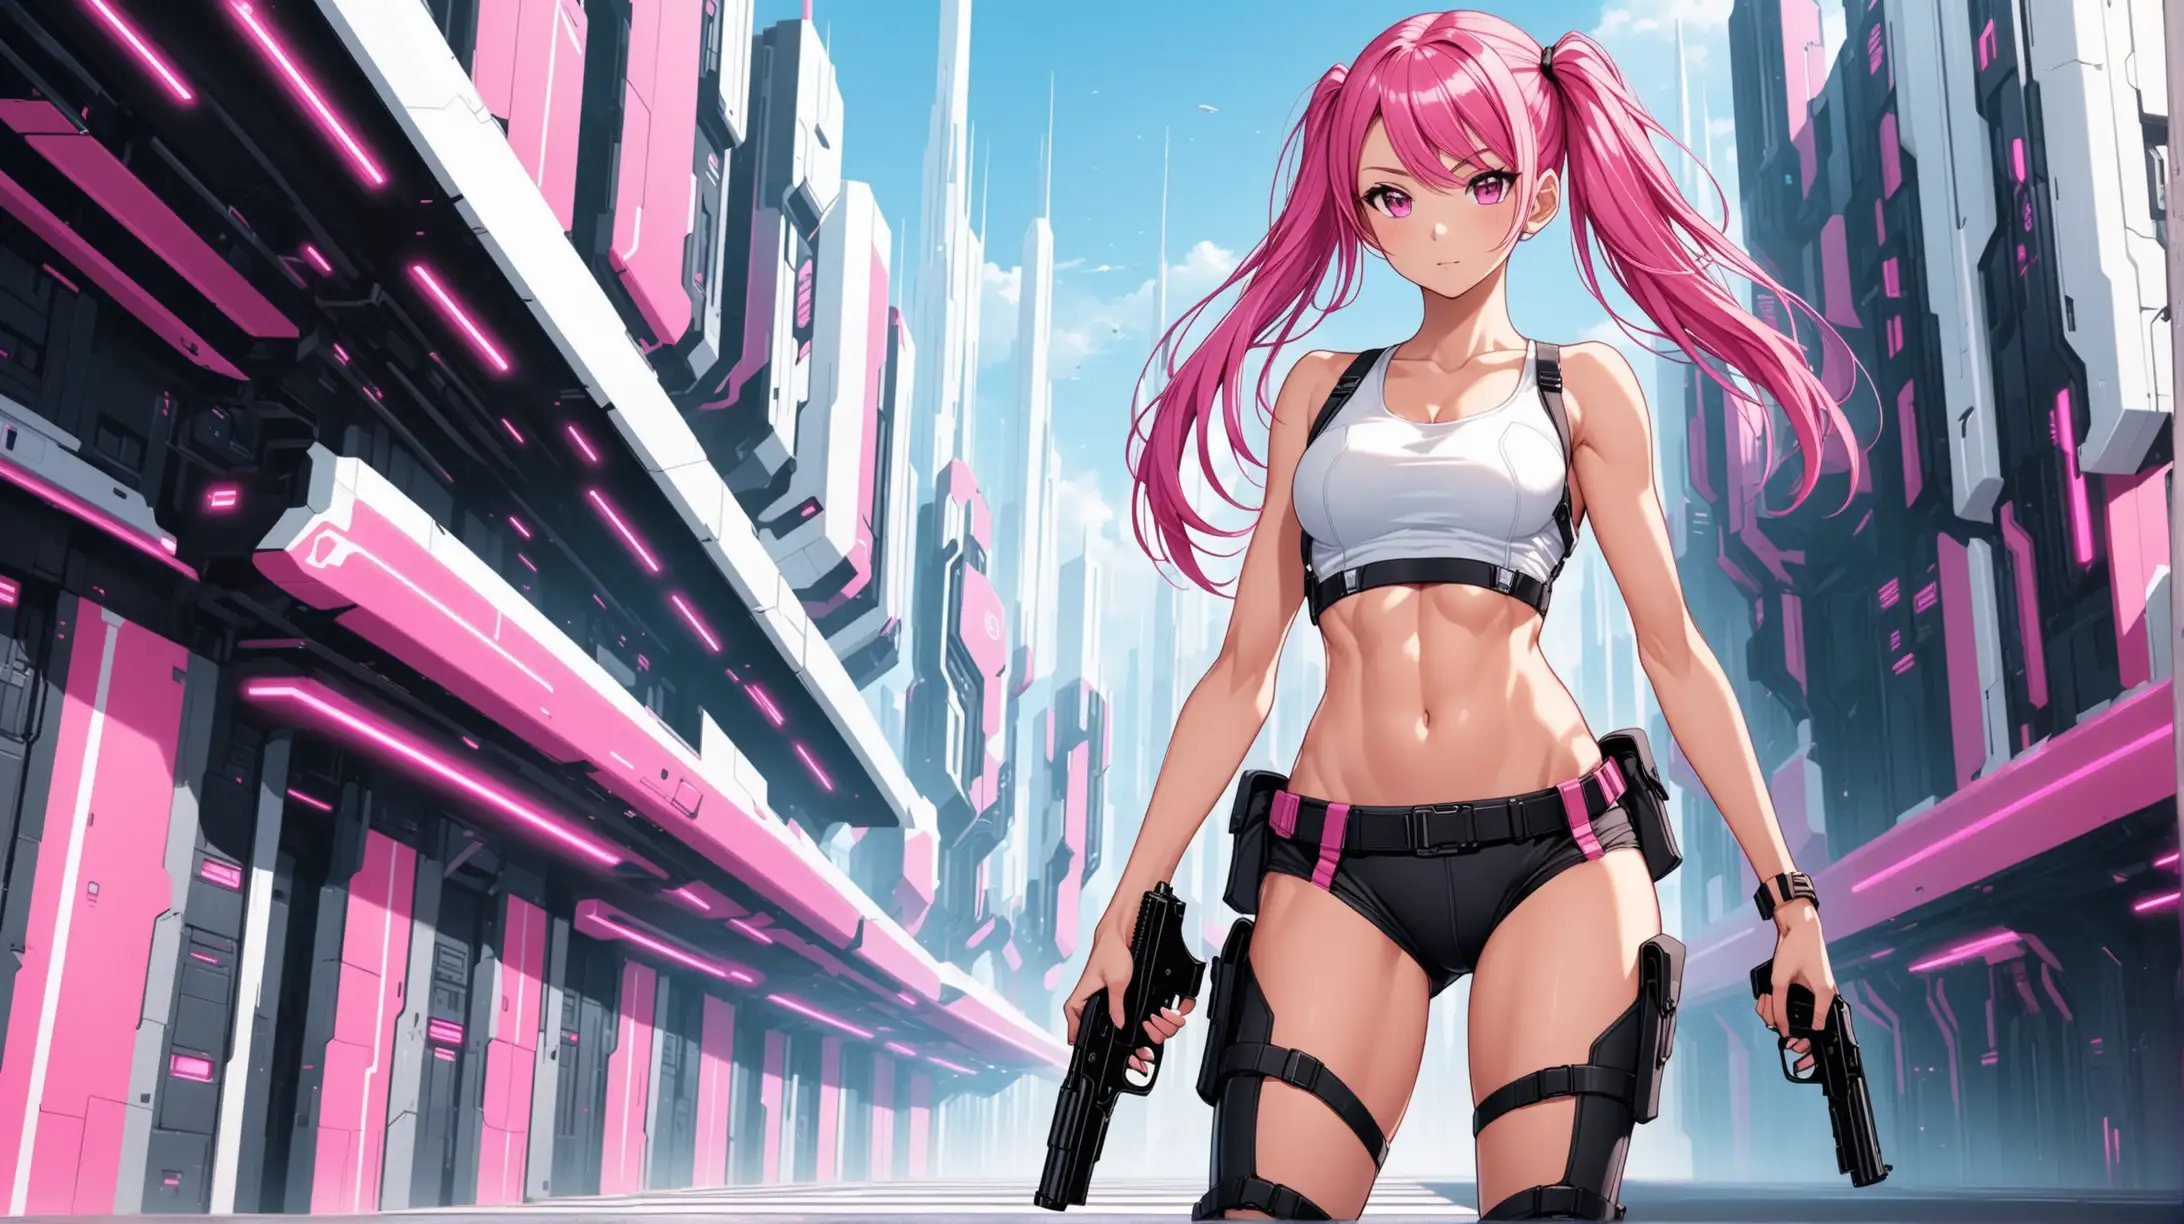 Futuristic Heroine with Pink Pigtails Poses Amid Urban Landscape